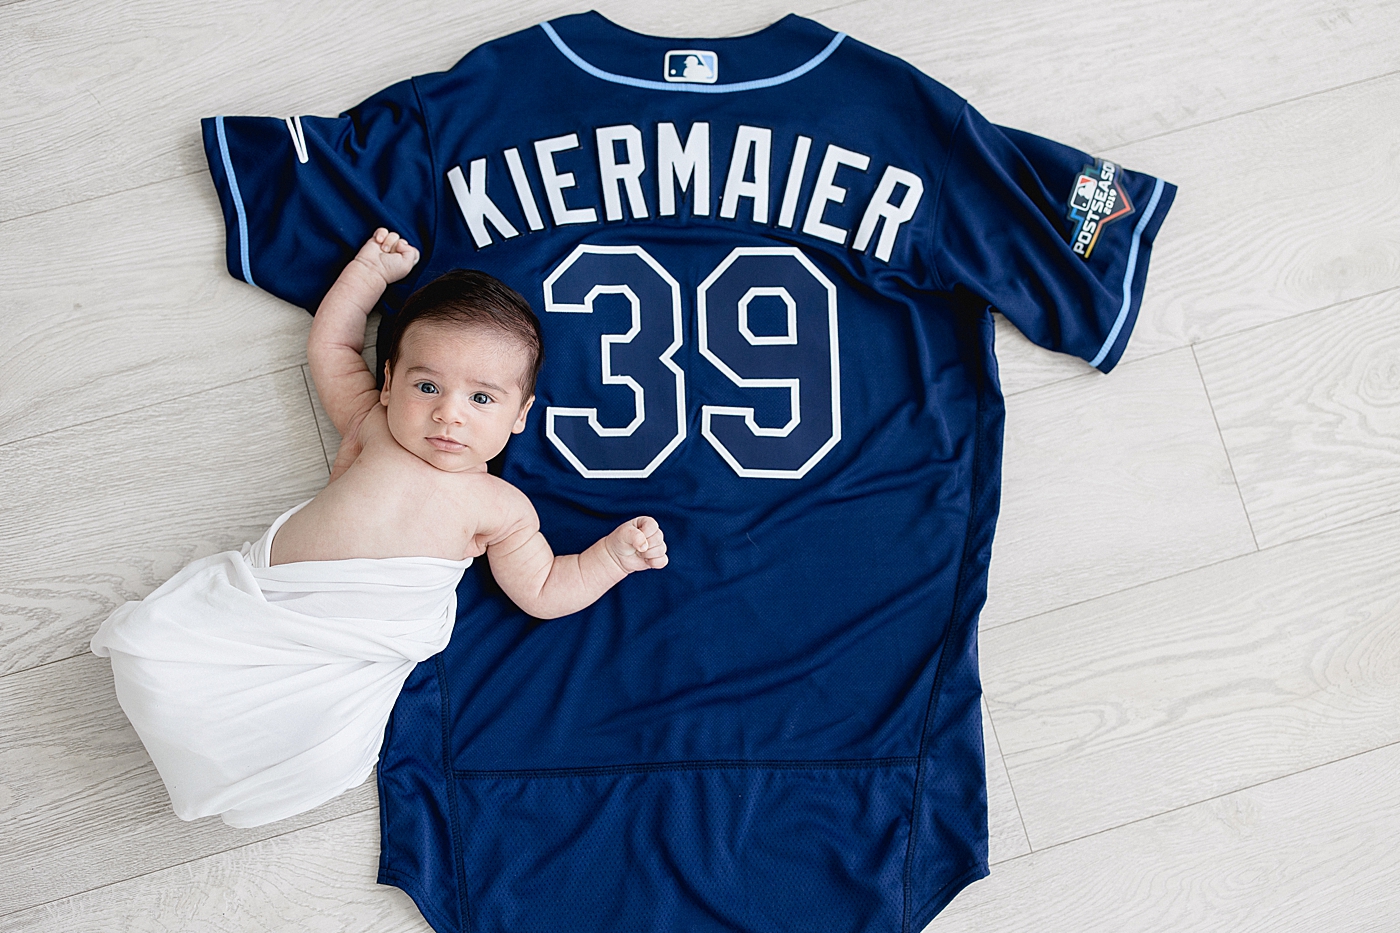 Newborn photo on baseball jersey for Kevin Kiermaier, center fielder for the Tampa Bay Rays. Photo by Brittany Elise Photography.